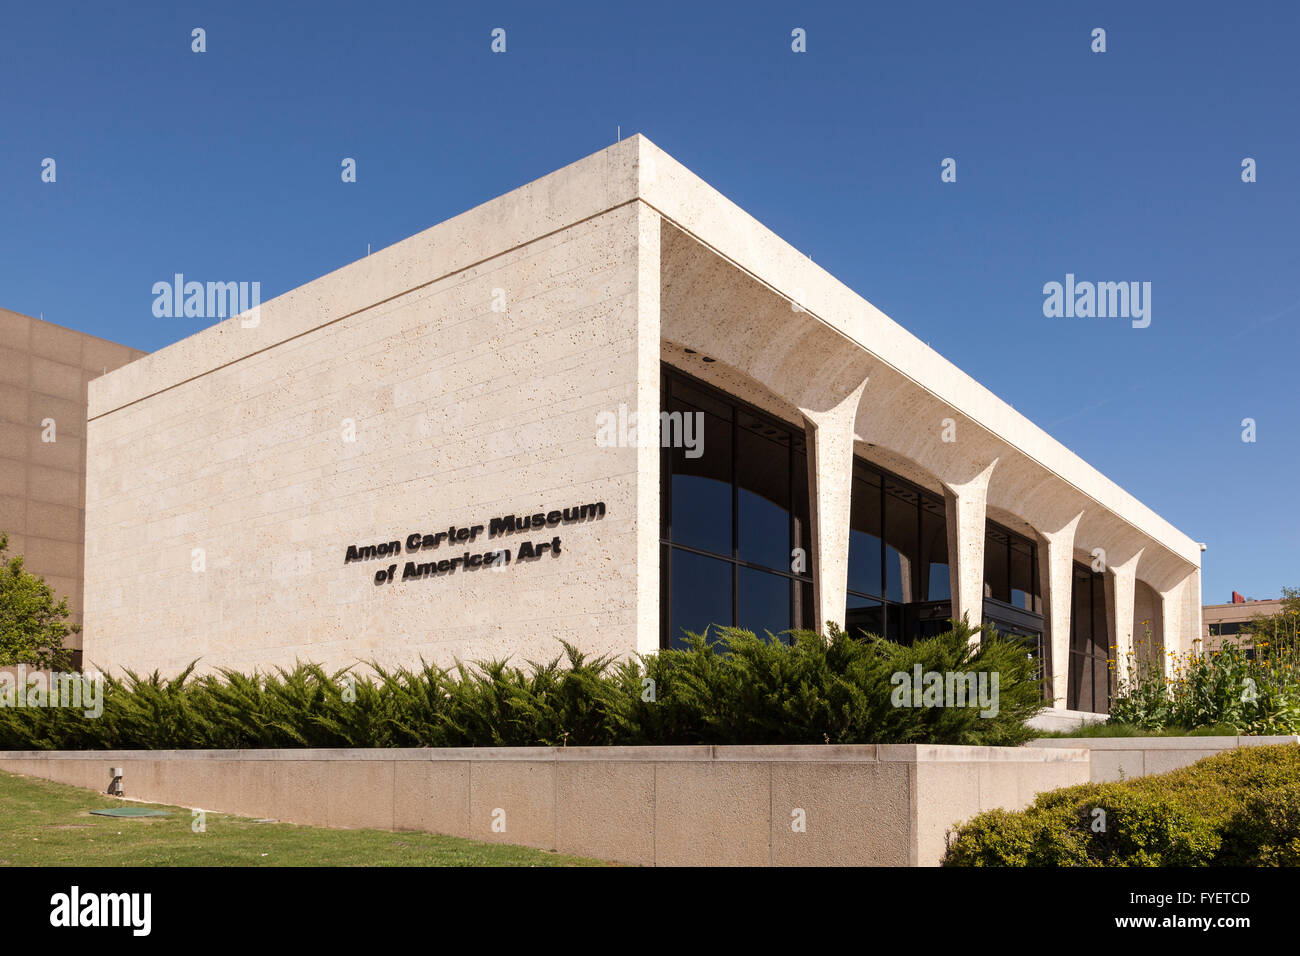 Amon Carter Museum of American Art in Fort Worth. April 6, 2016 in Fort Worth, Texas, USA Stock Photo